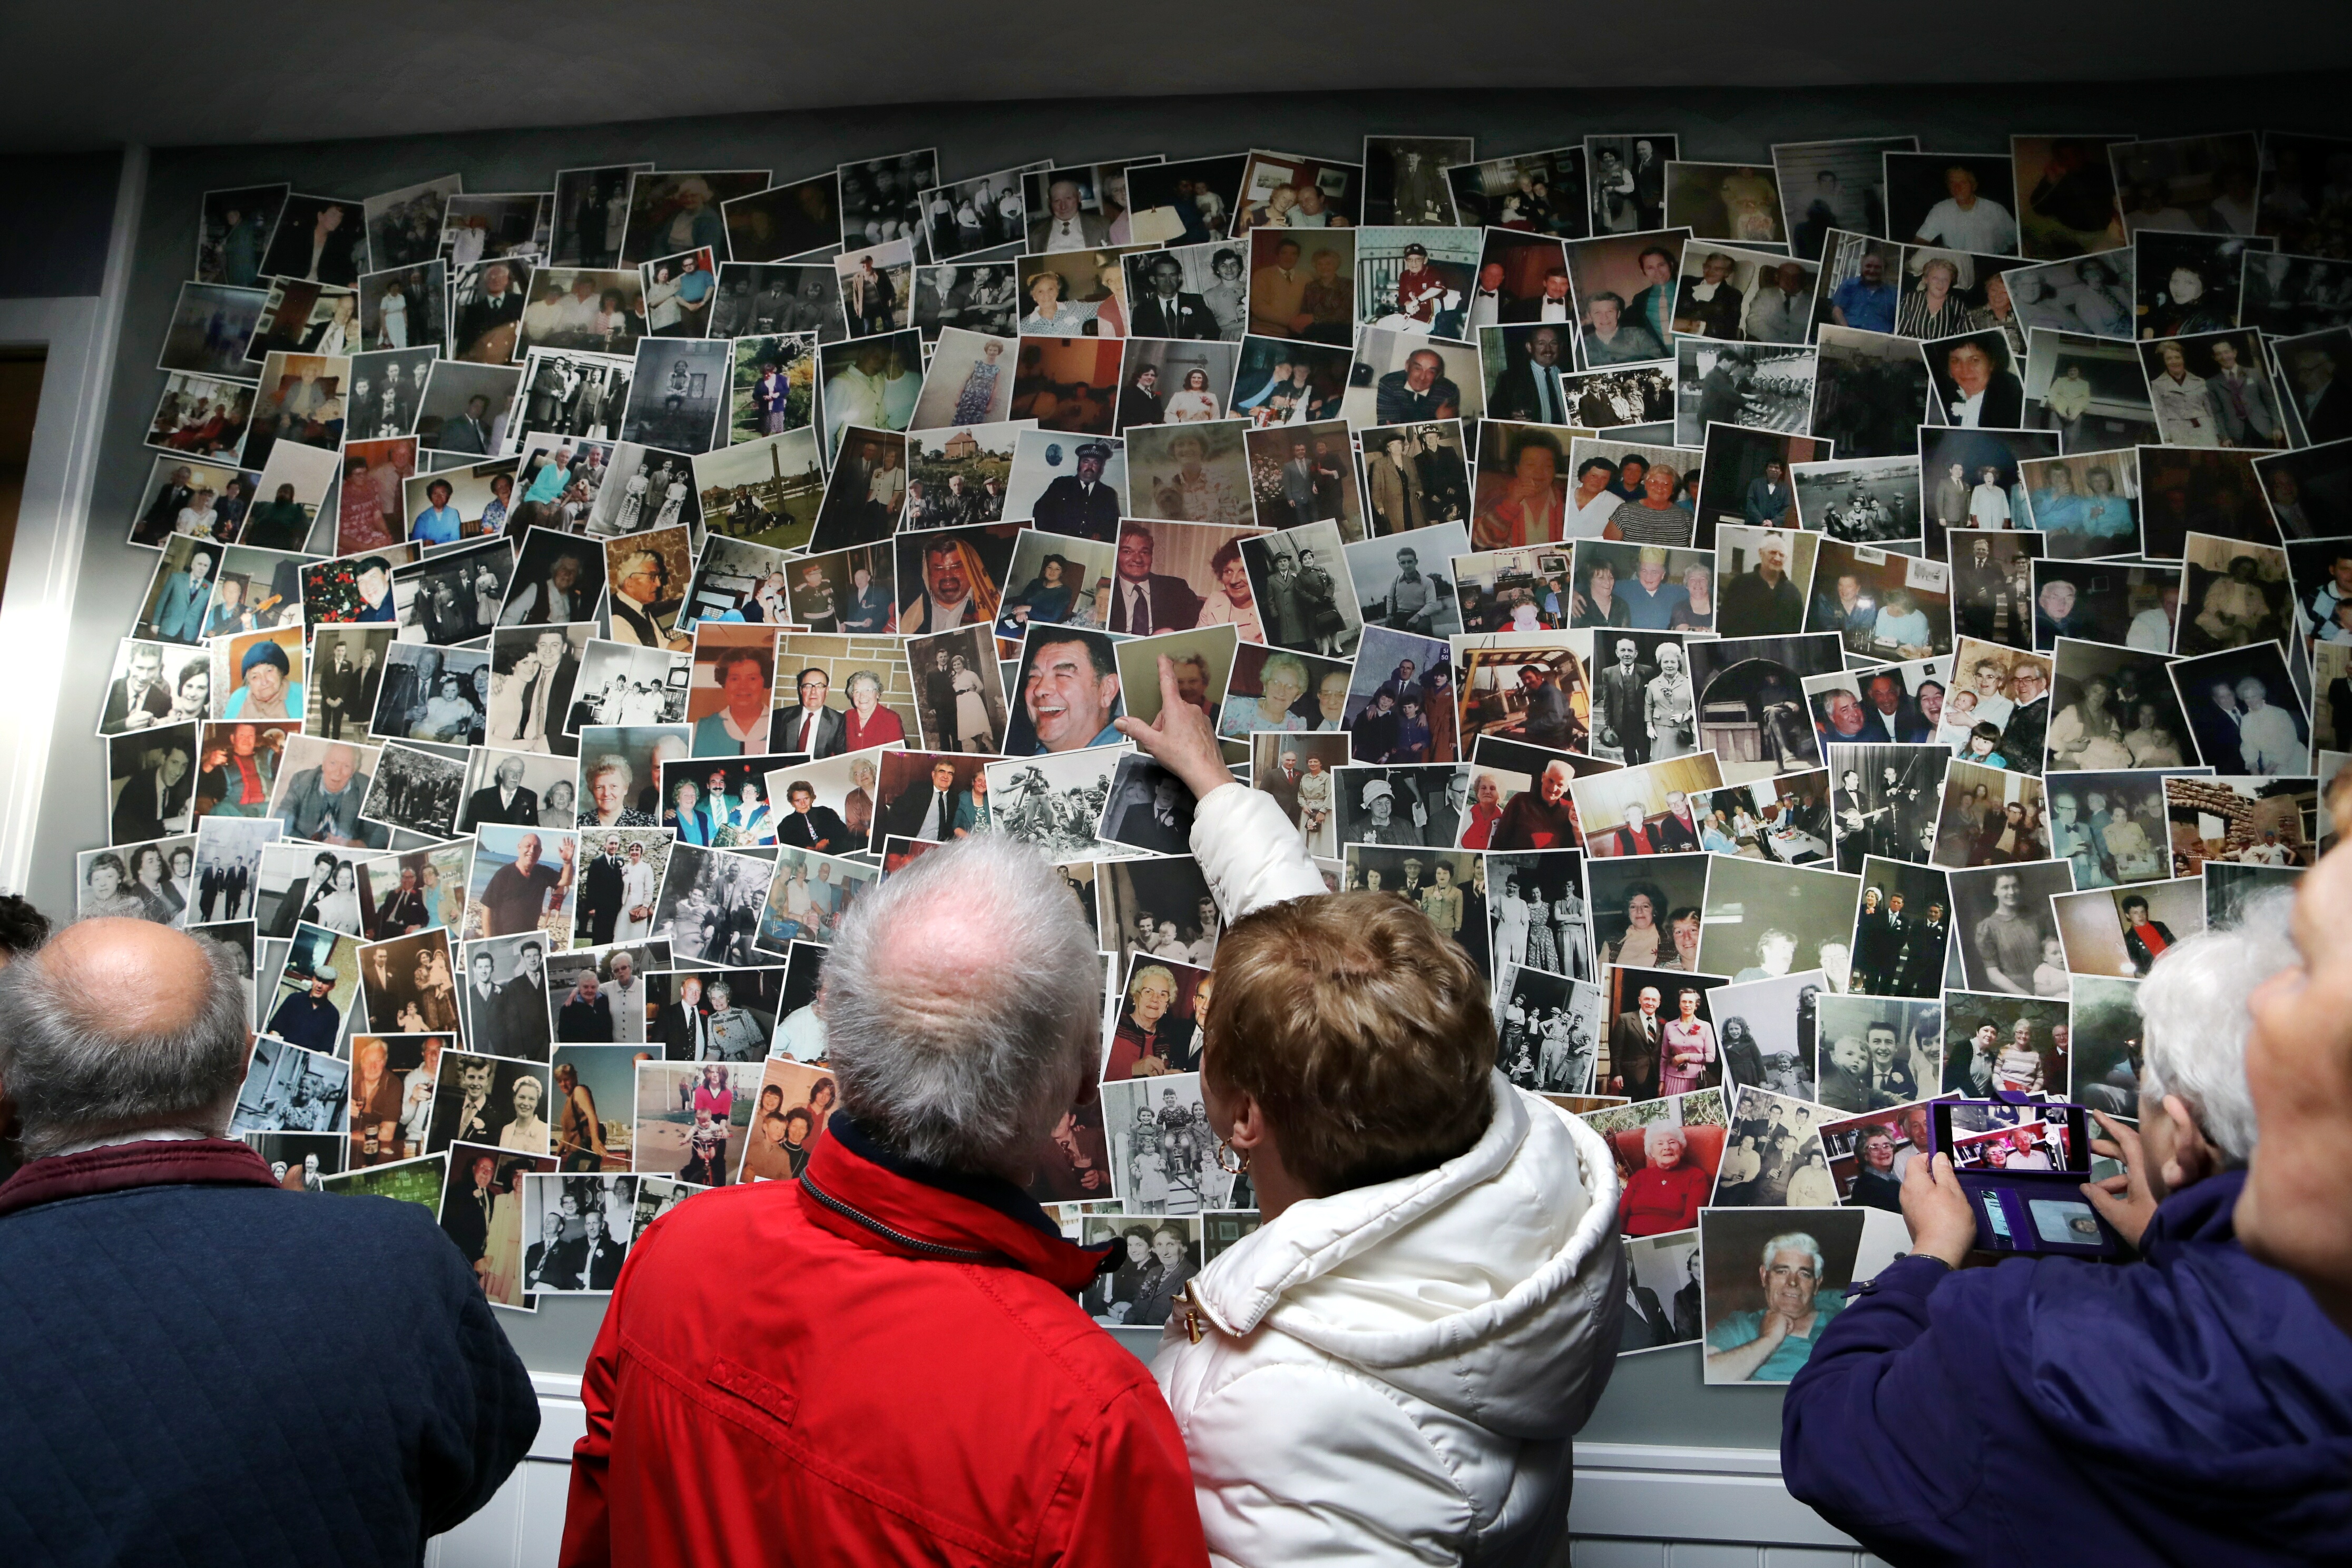 The memory wall was a popular attraction at the official opening.